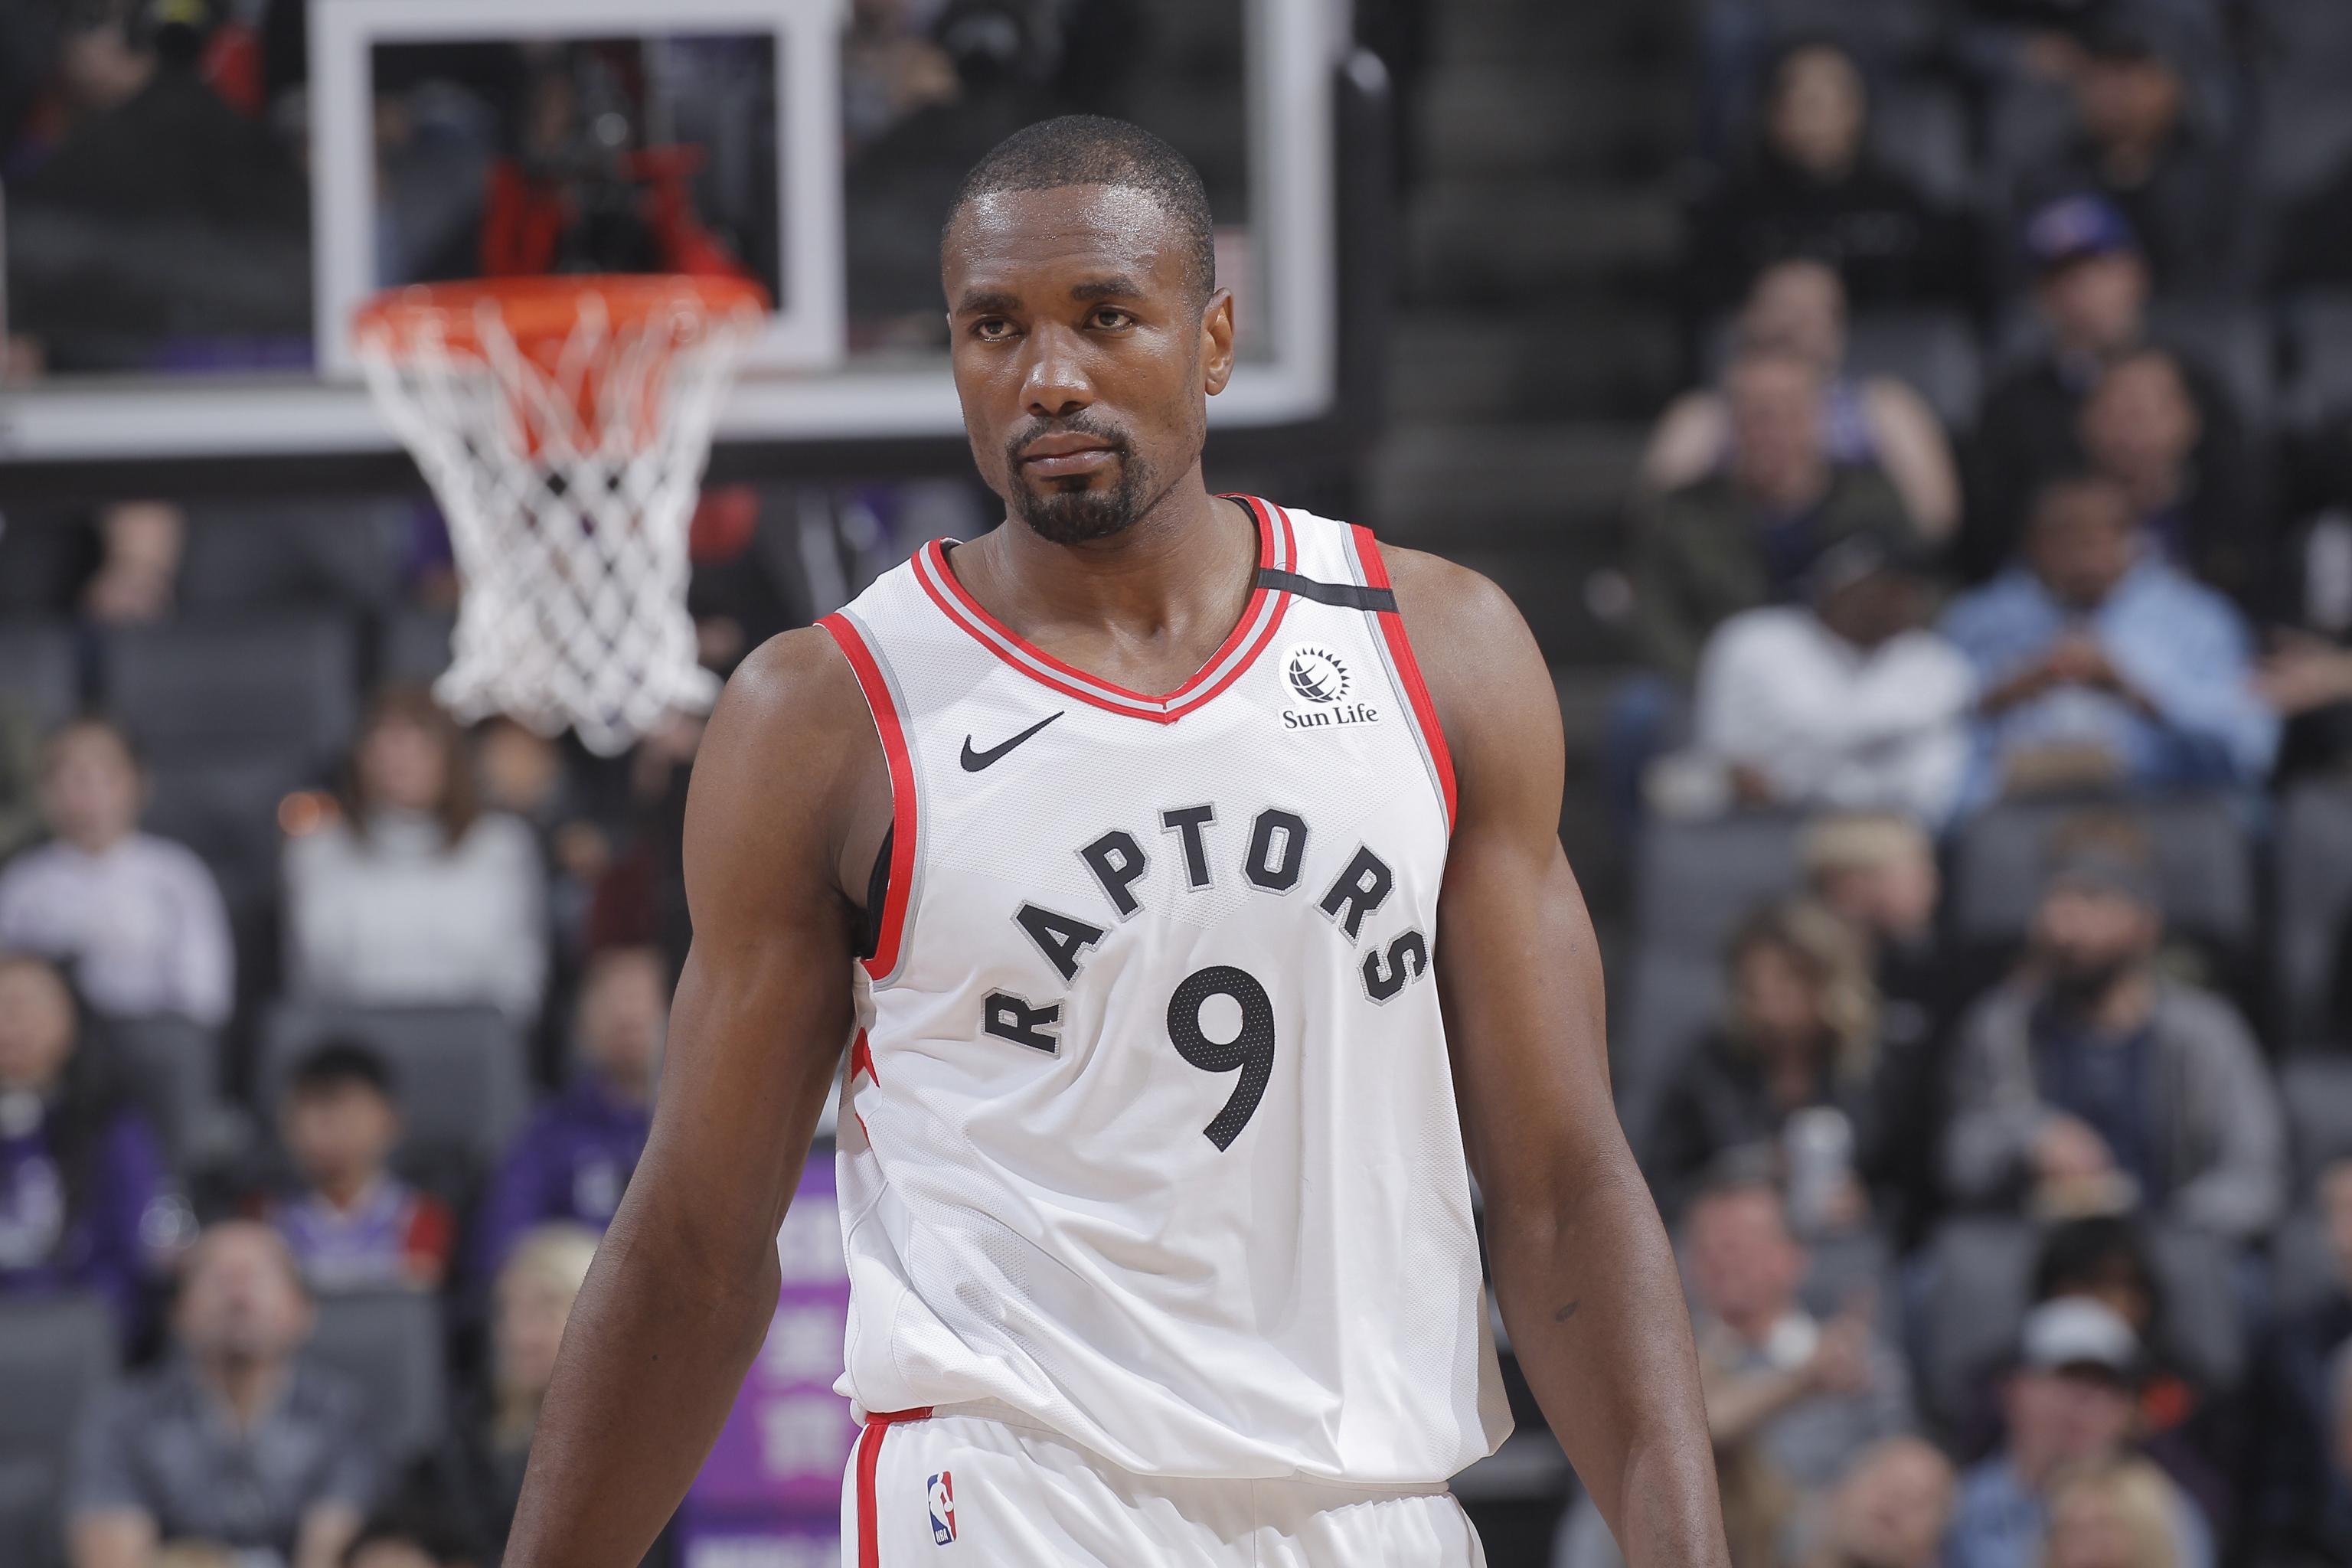 Raptors' Ibaka to host virtual talent show, donate $20K to COVID-19 relief